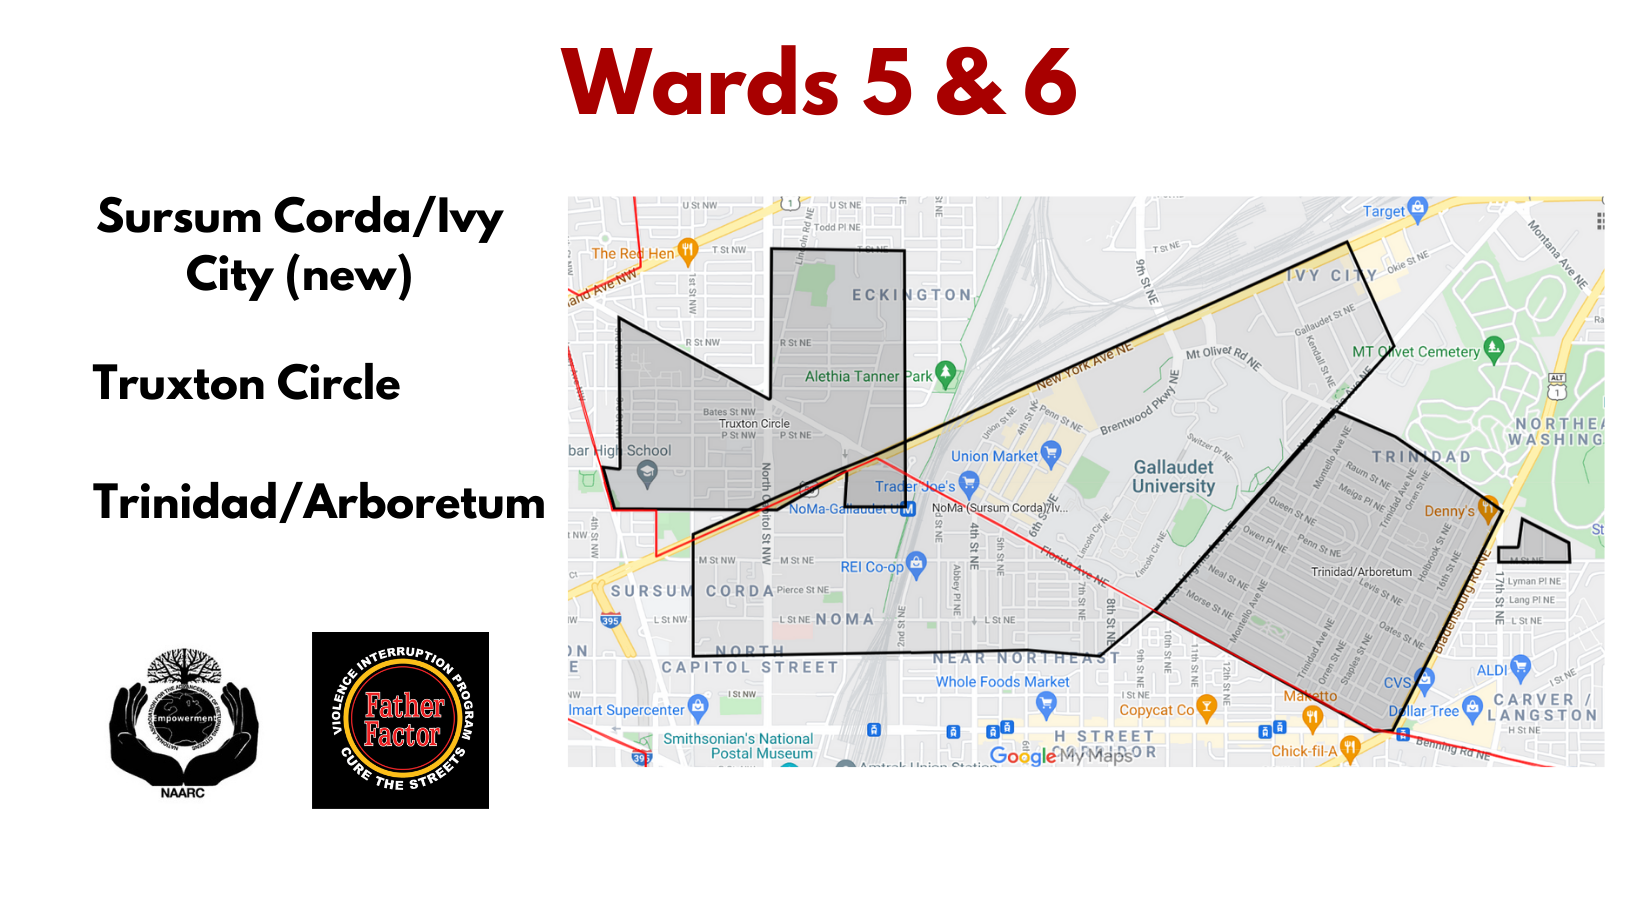 sites in wards 5 and 6